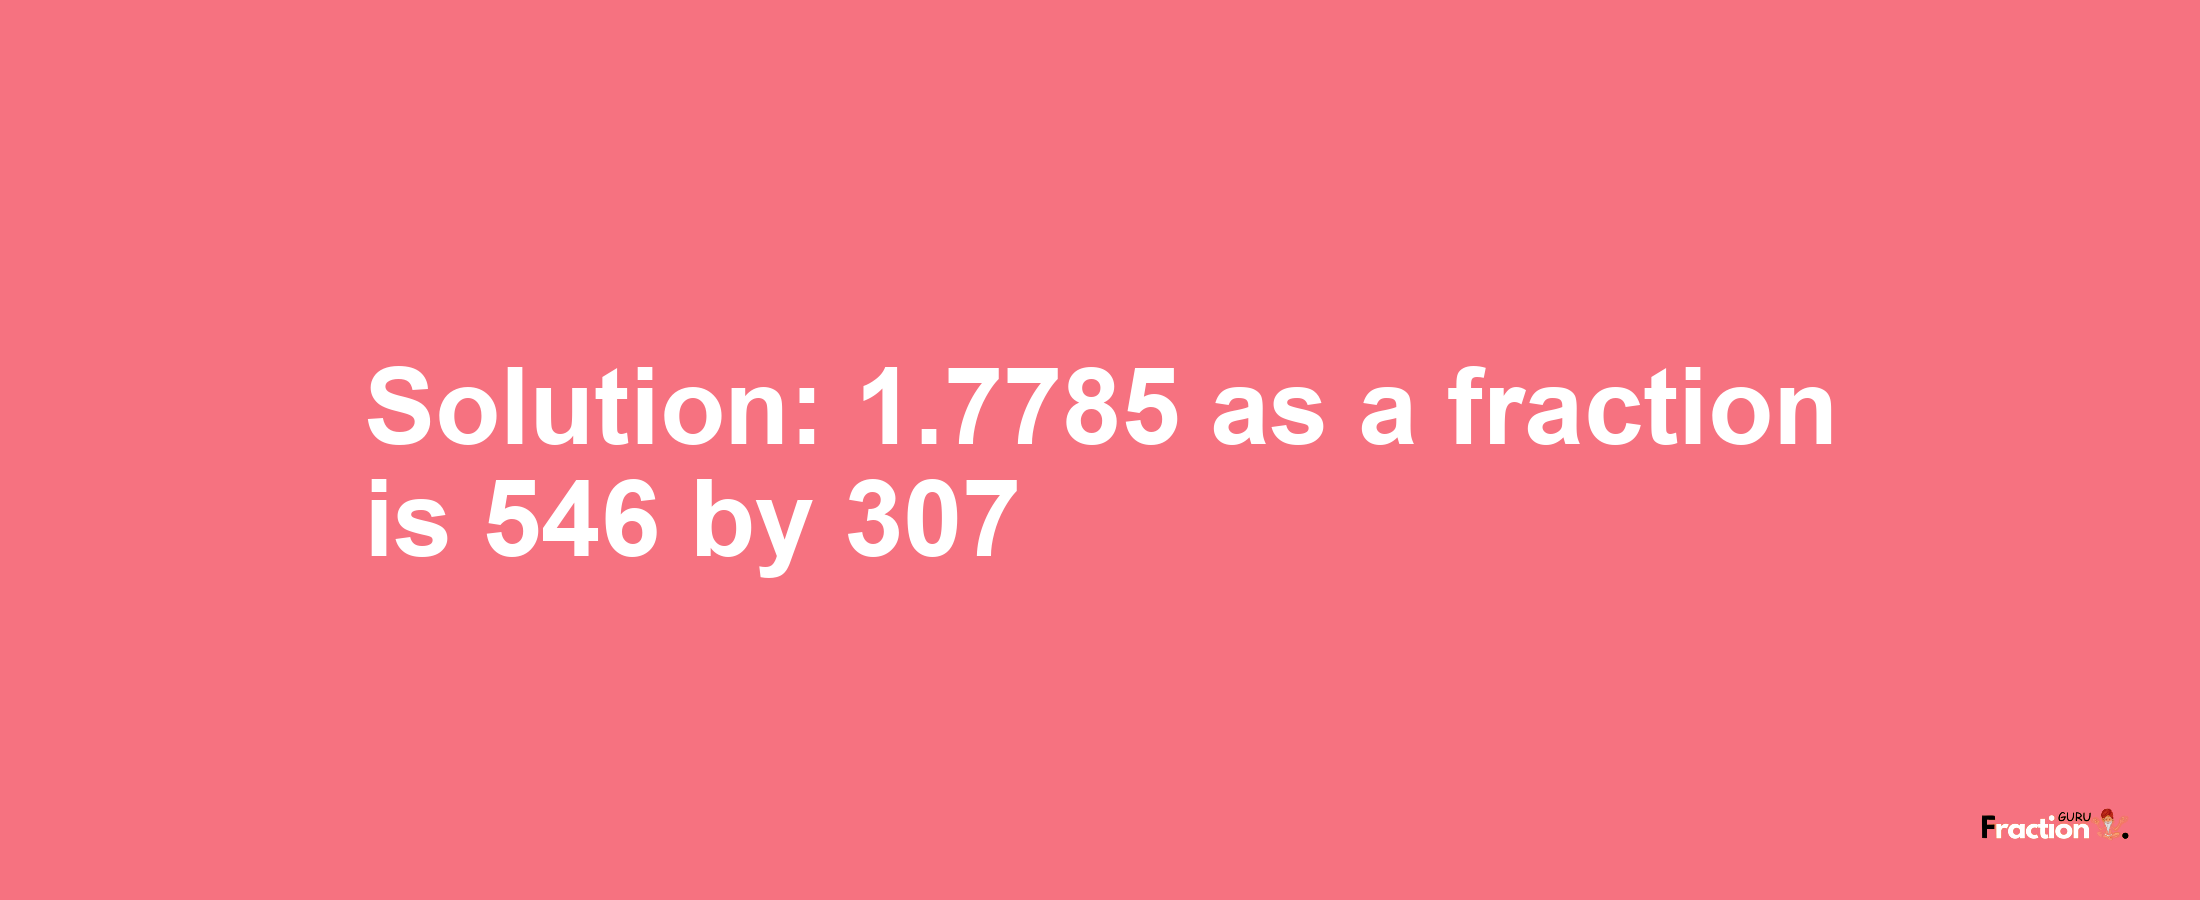 Solution:1.7785 as a fraction is 546/307